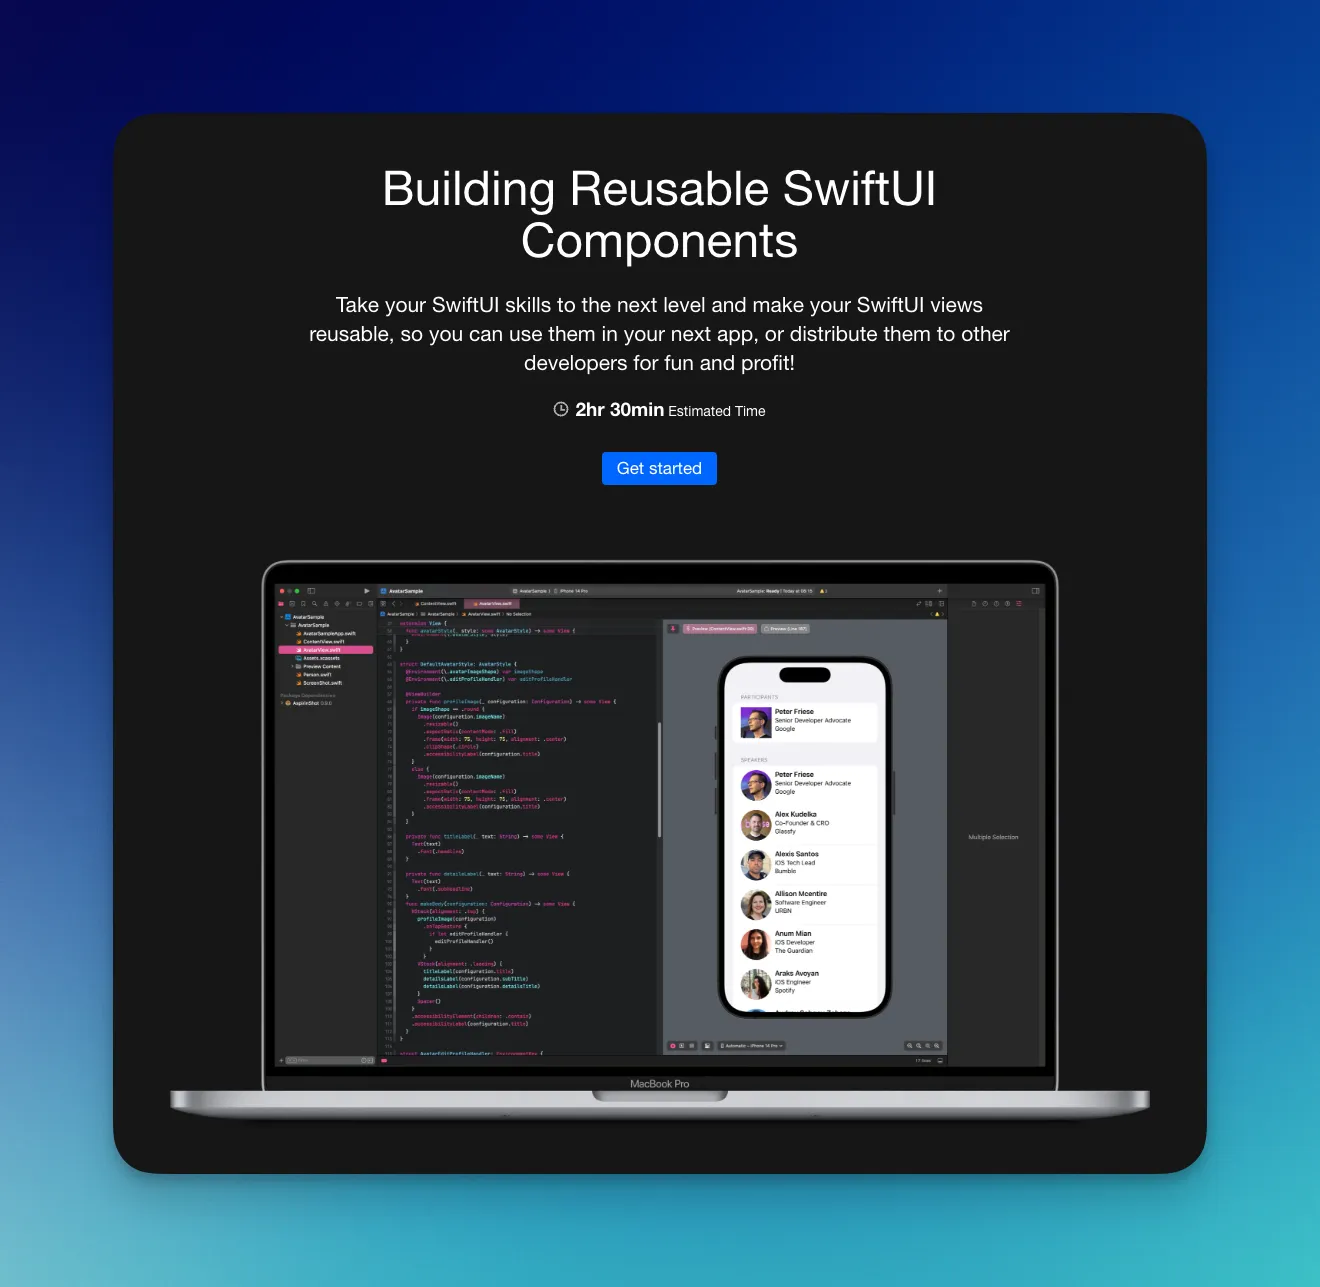 Building Reusable SwiftUI Components